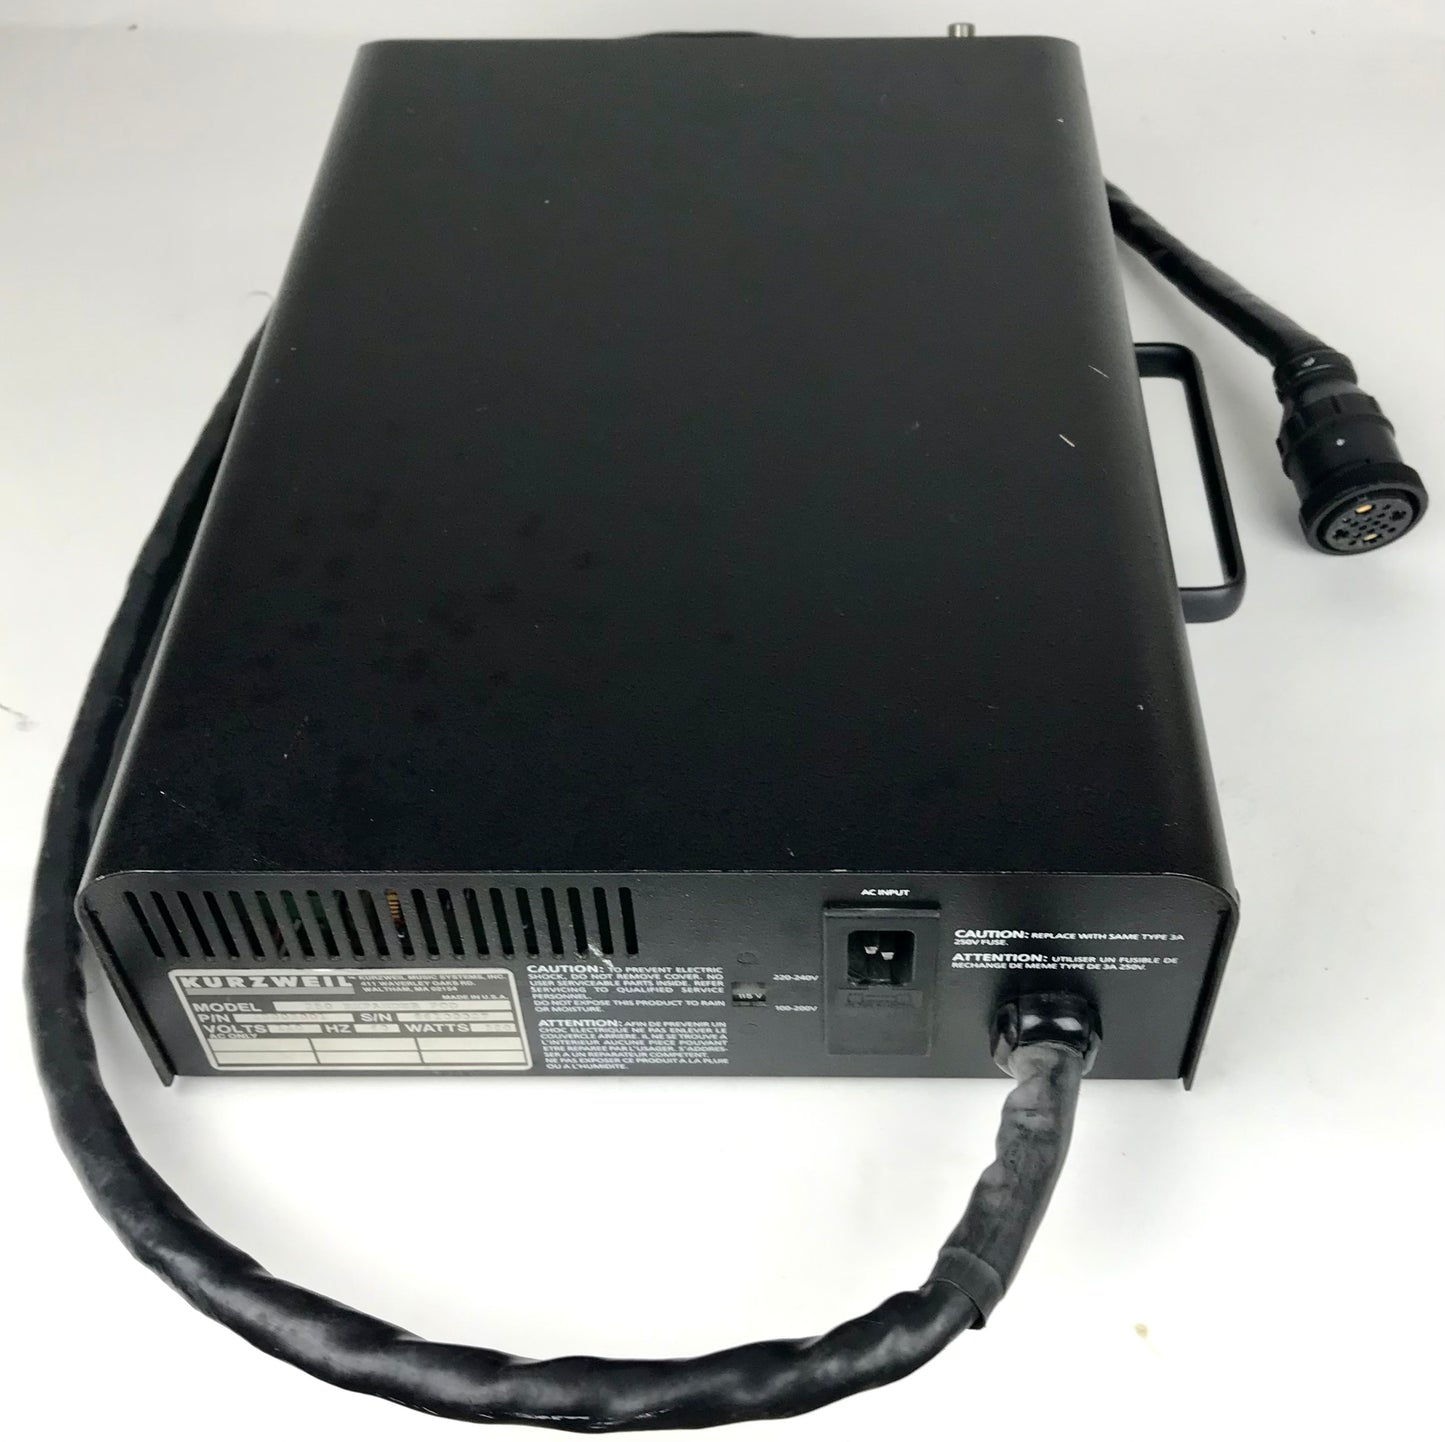 250 Expander Pod power supply (untested, for parts)